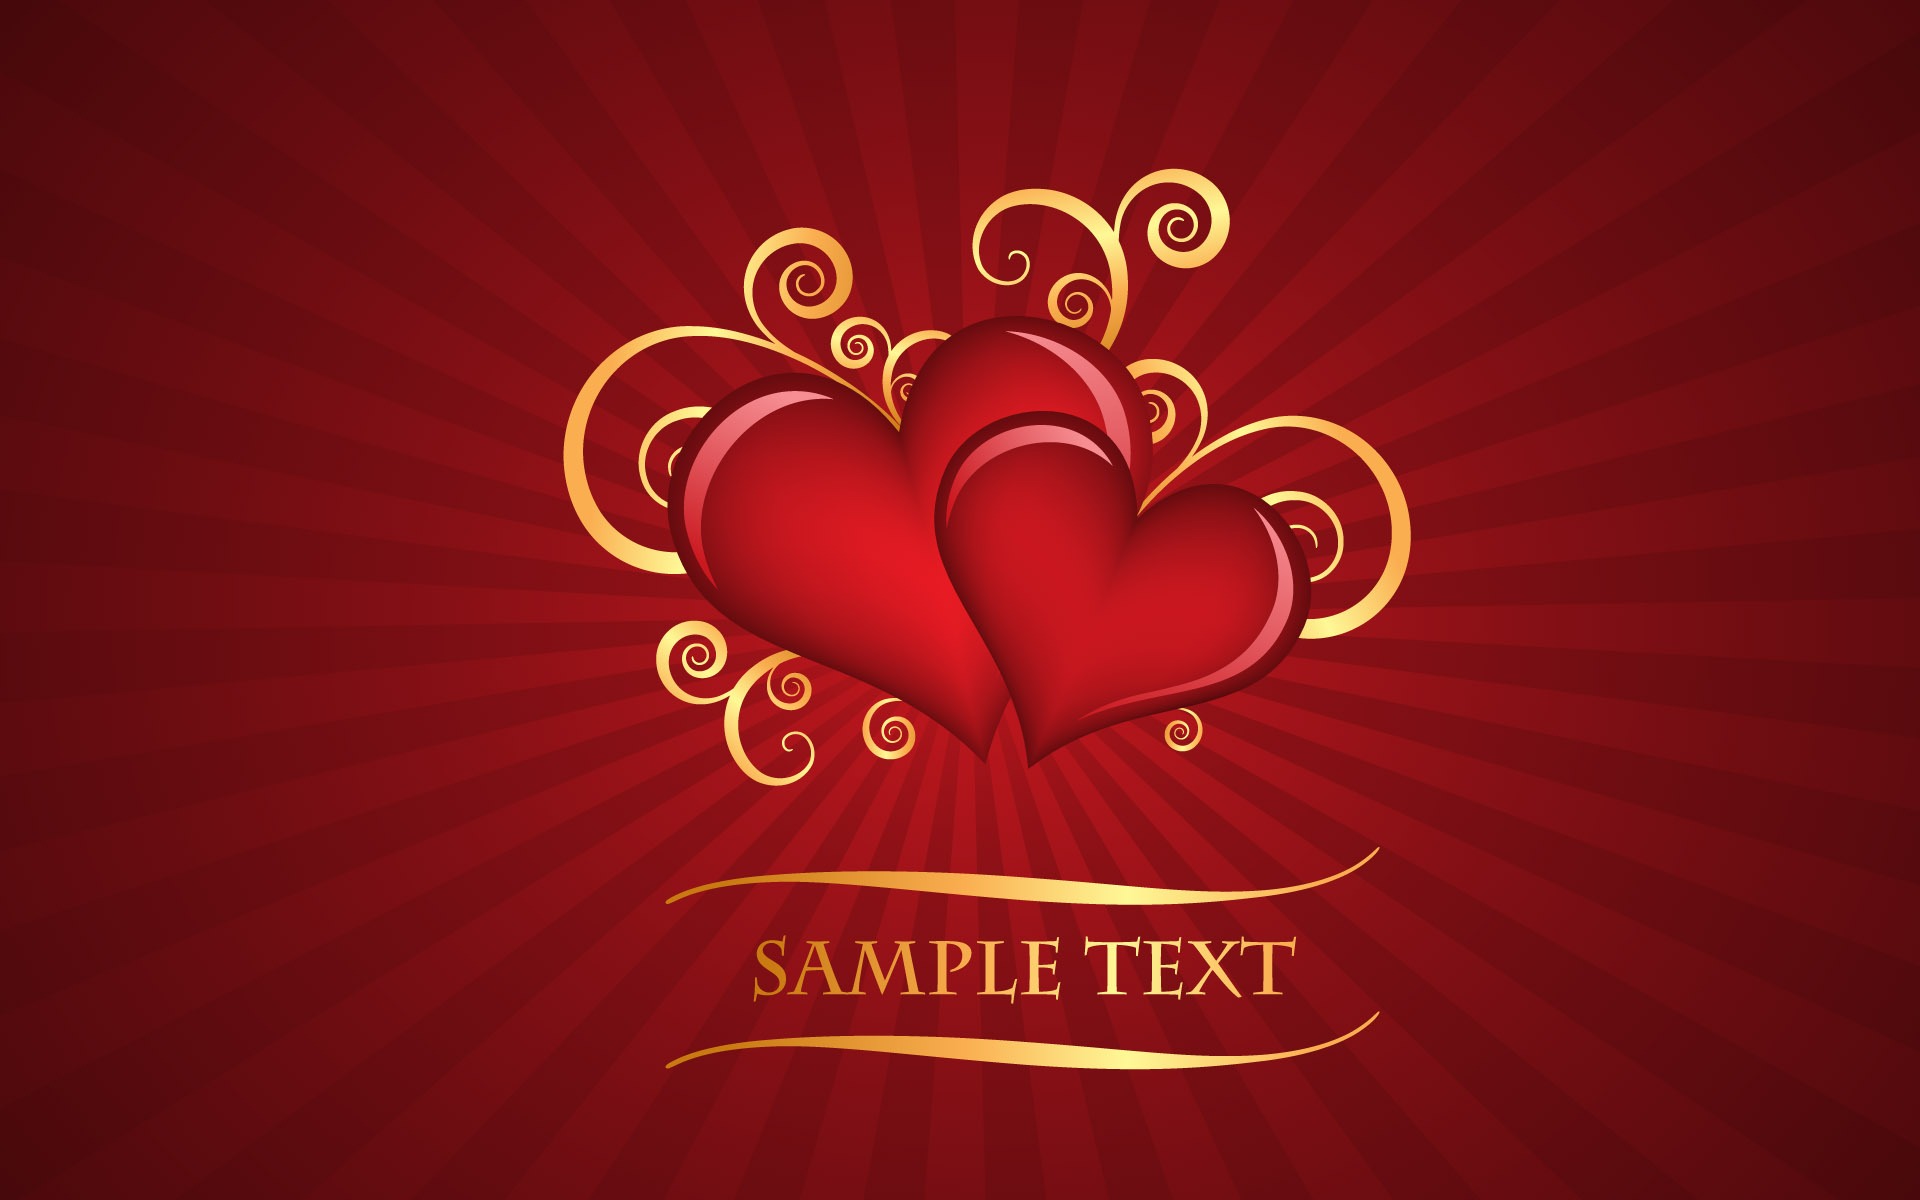 Valentine's Day Theme Wallpapers (6) #9 - 1920x1200